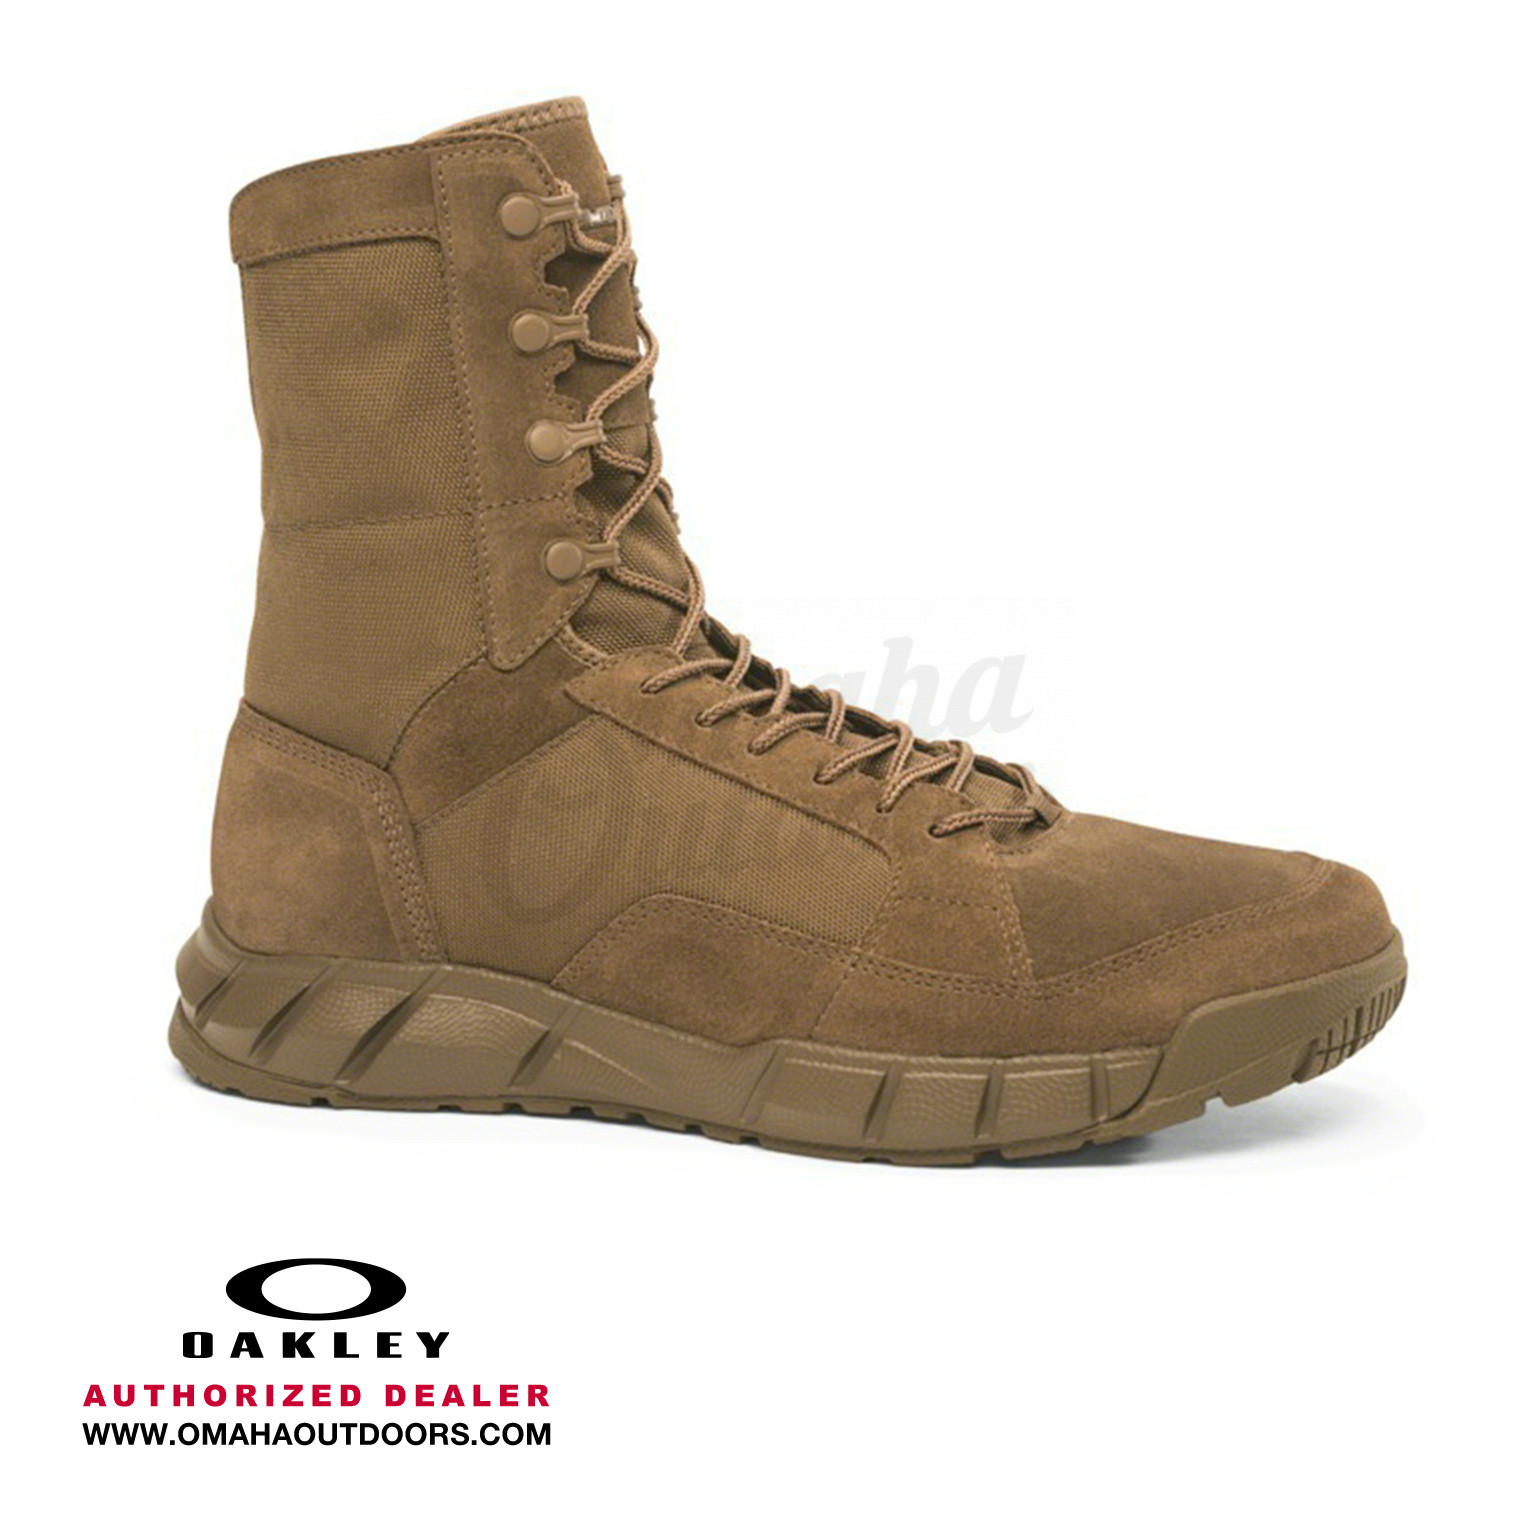 Oakley Light Assault Boot 2 Coyote Brown 11.5 - Free Shipping